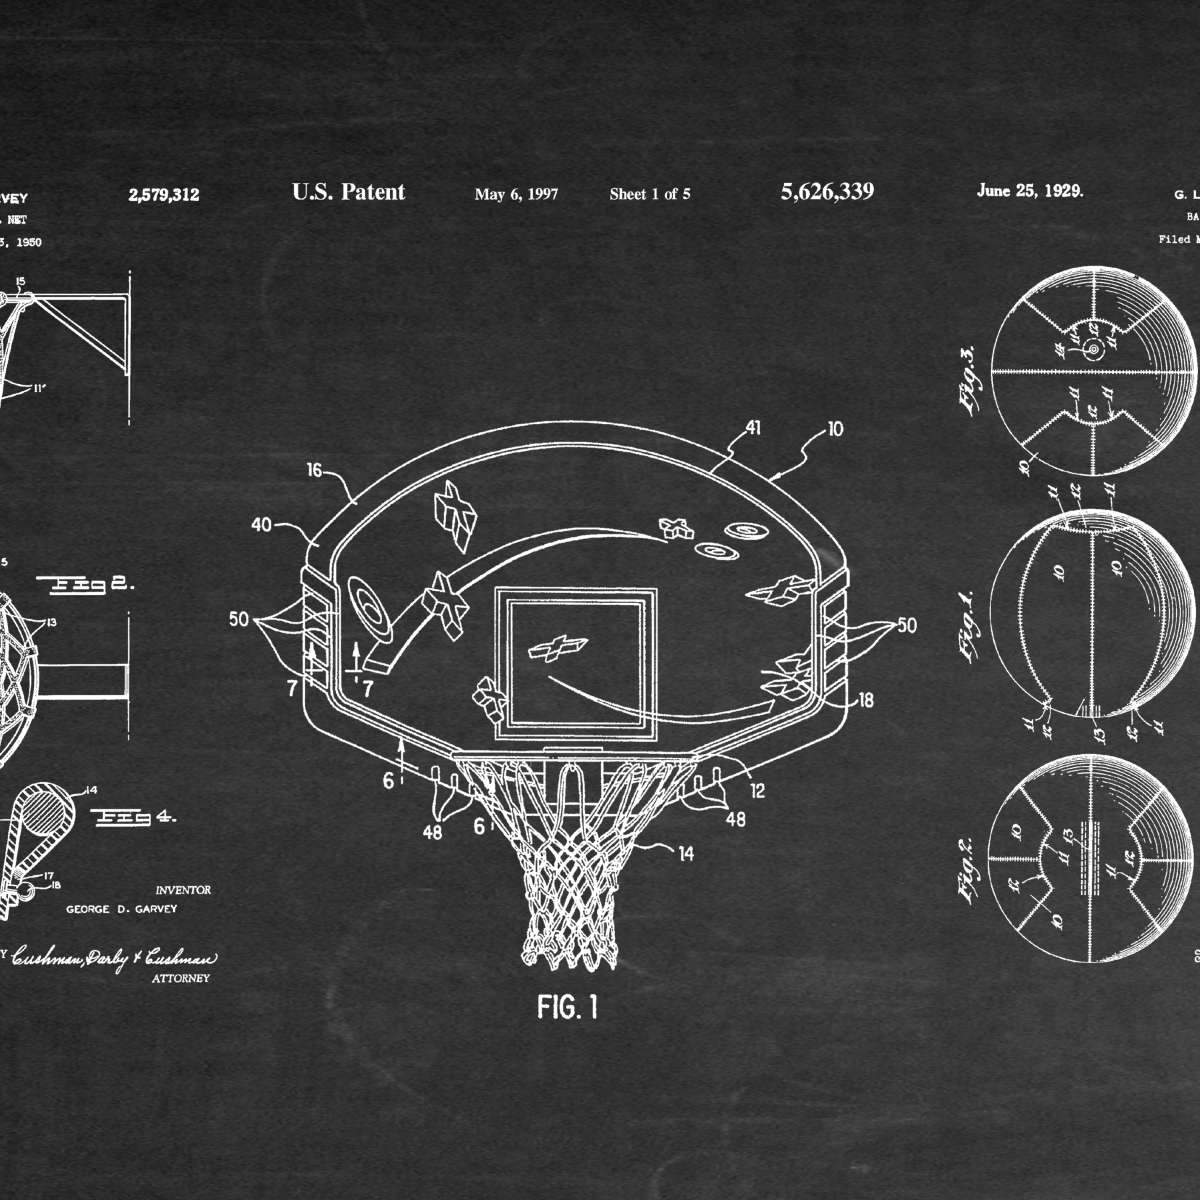 Basketball Old Vintage Patent Drawing Print by grandeduc